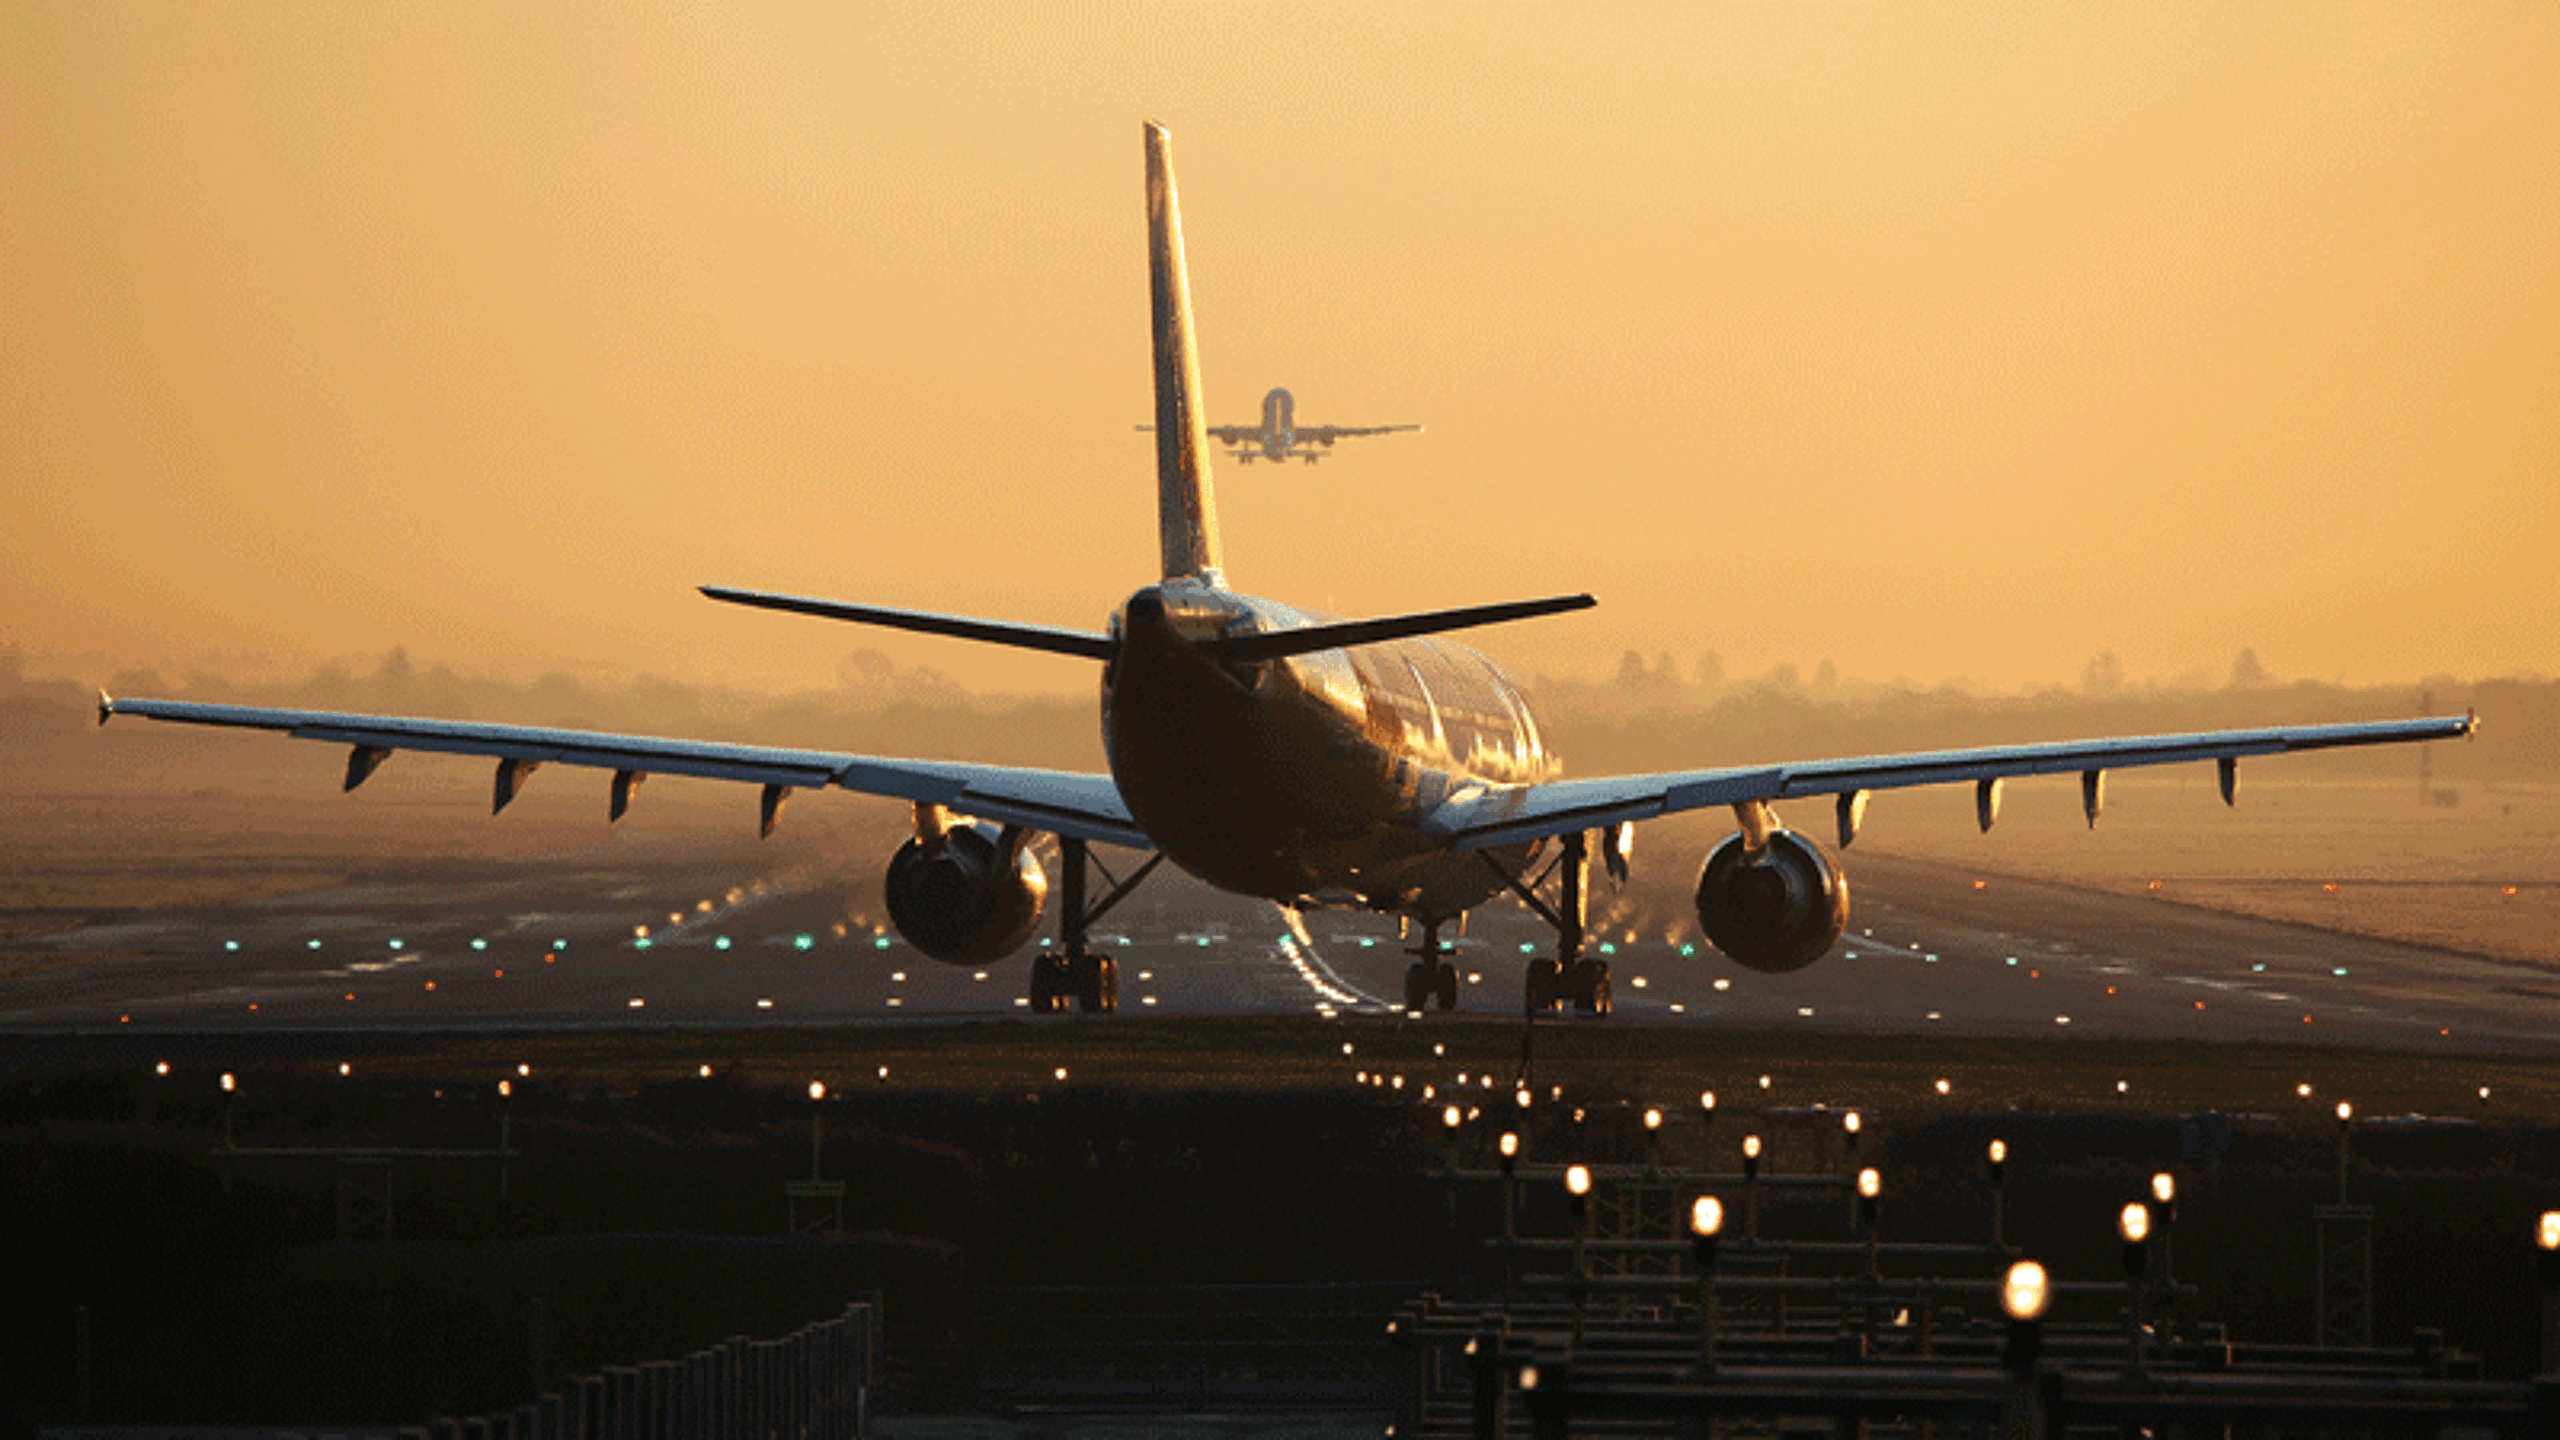 UK’s low-carbon aviation fuels strategy coming in late 2023, Ministers confirm